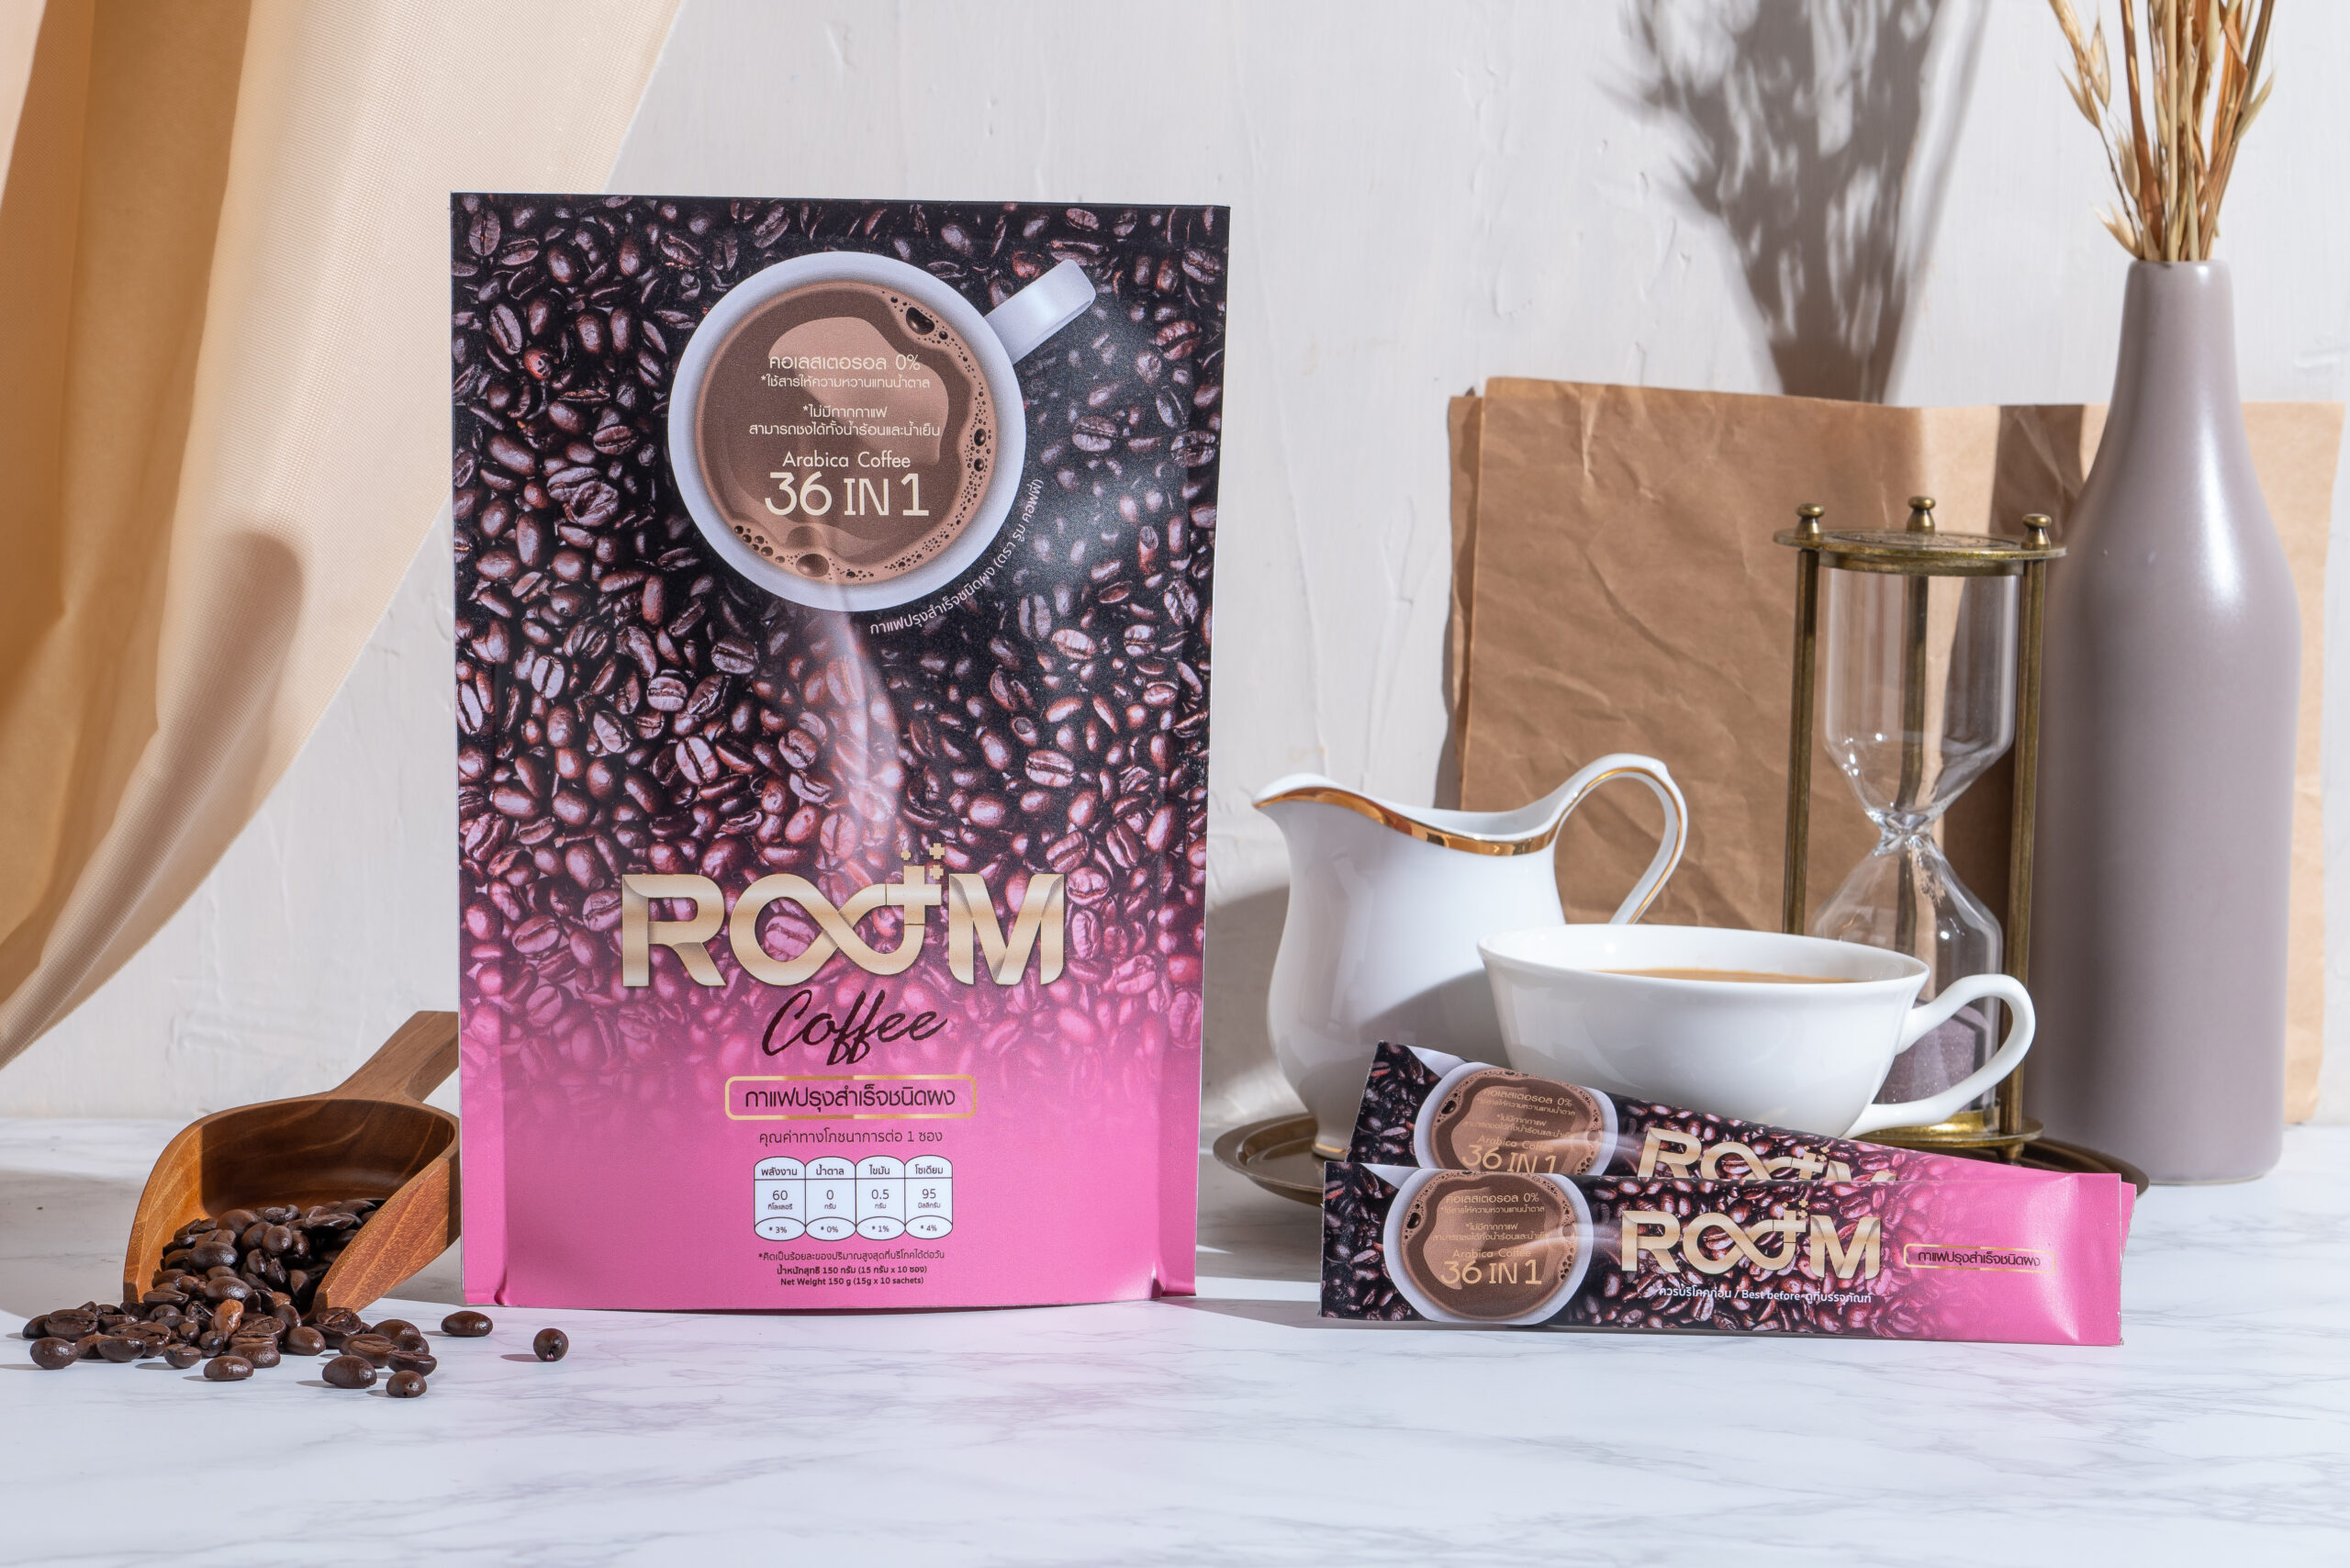 Room Coffee Product Image BOOM309262 - The iCon Group